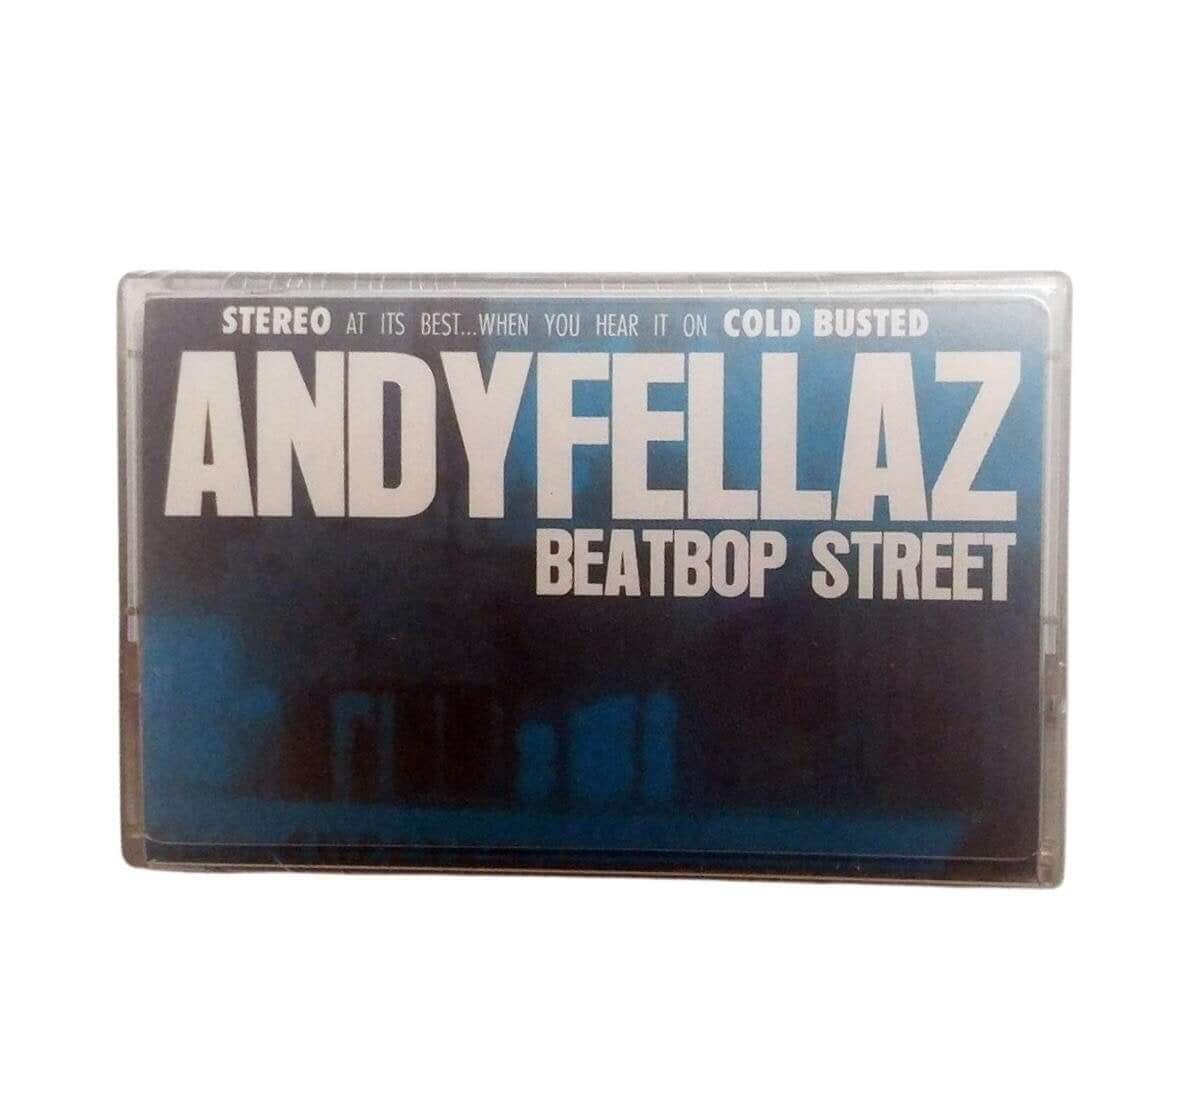 AndyFellaz - BeatBop Street - Limited Edition Cassette - Cold Busted